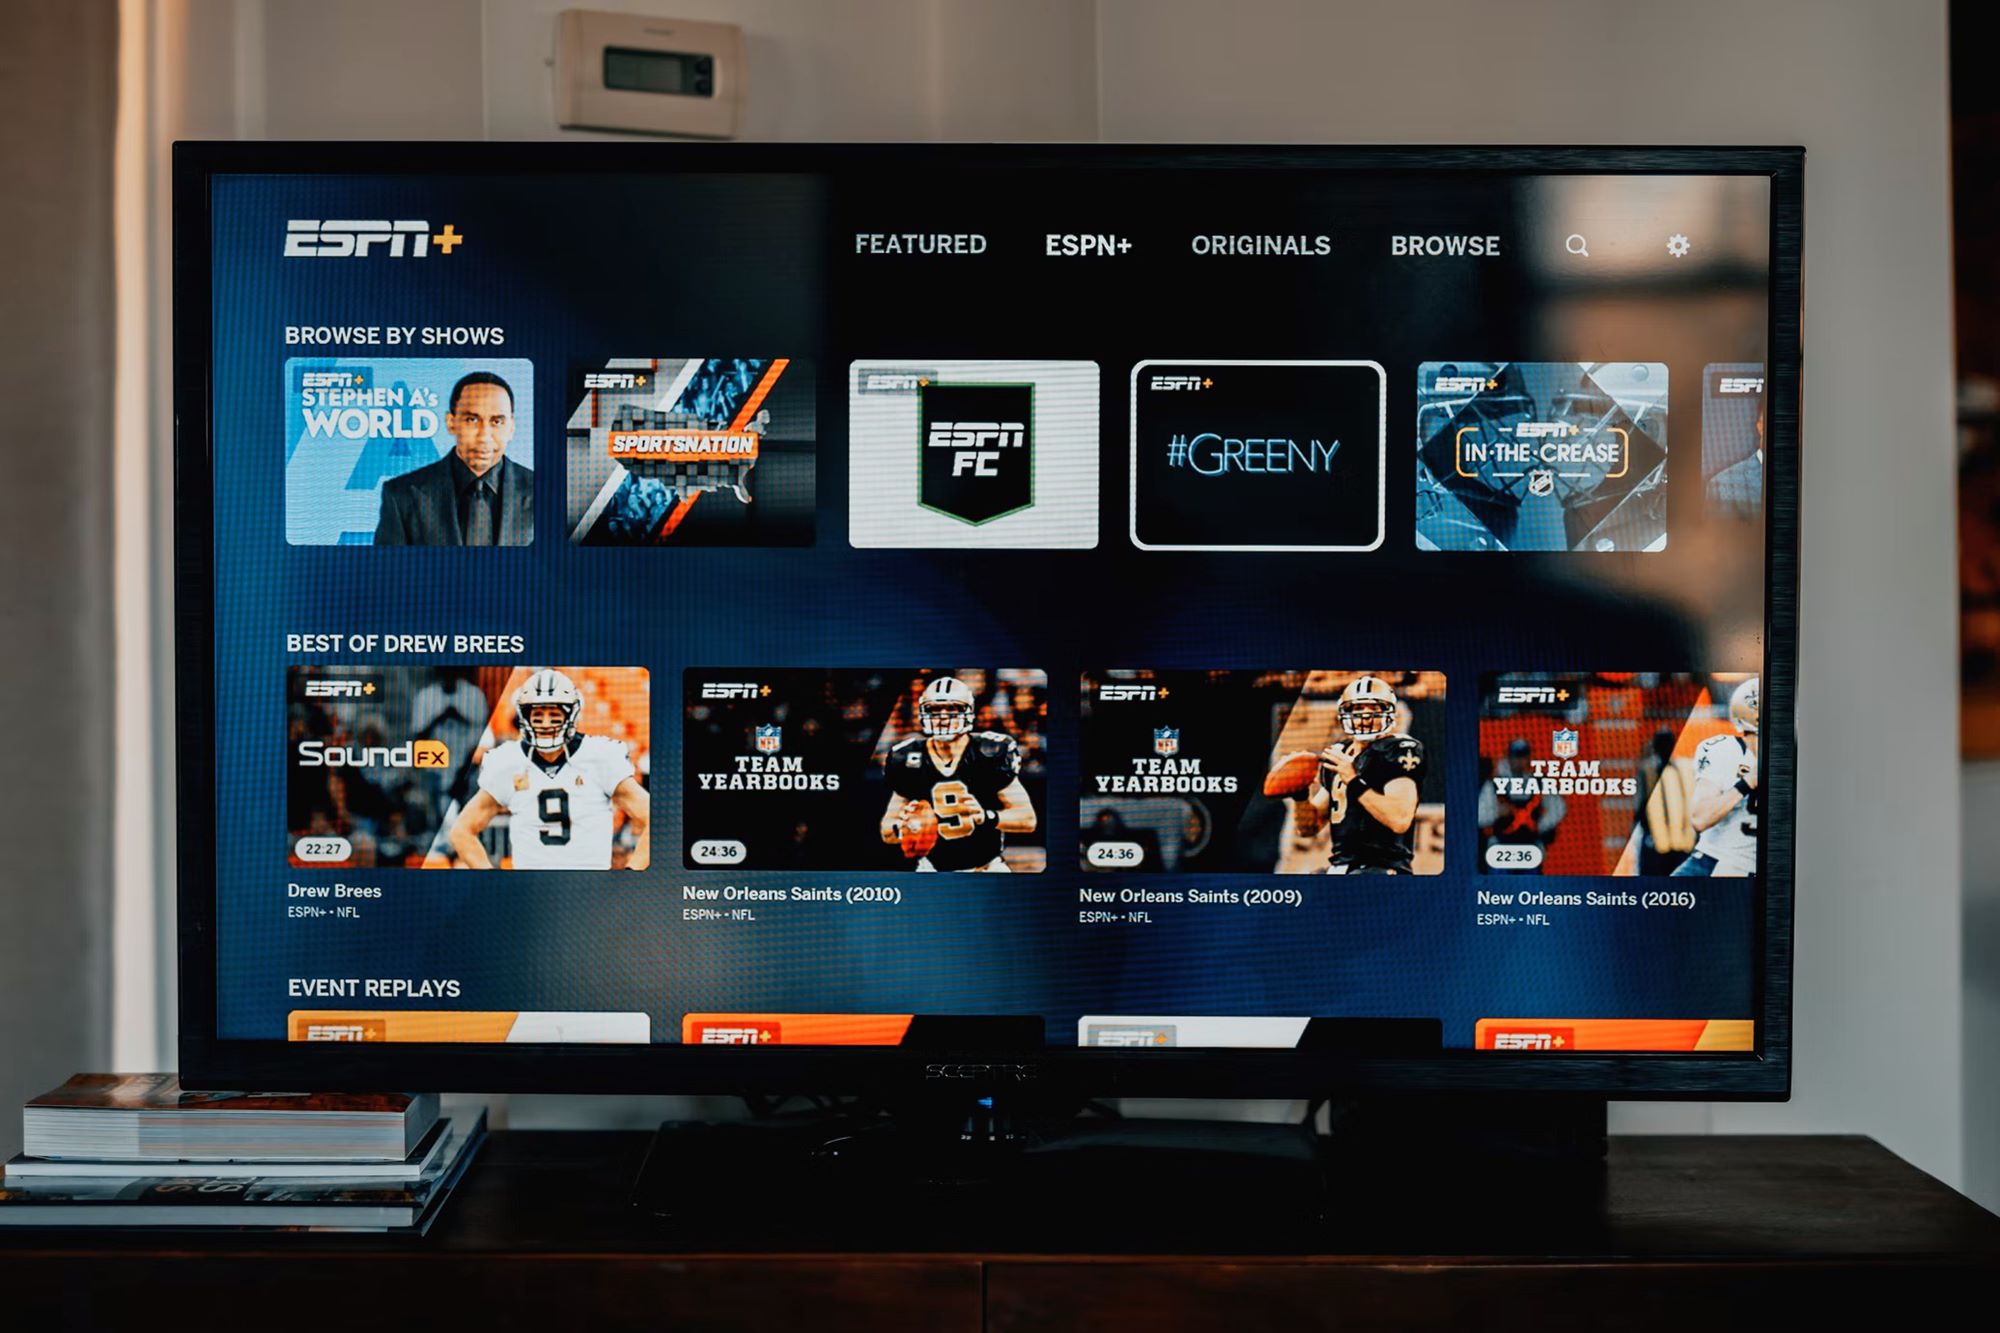 How To Watch ESPN On LG Smart TV